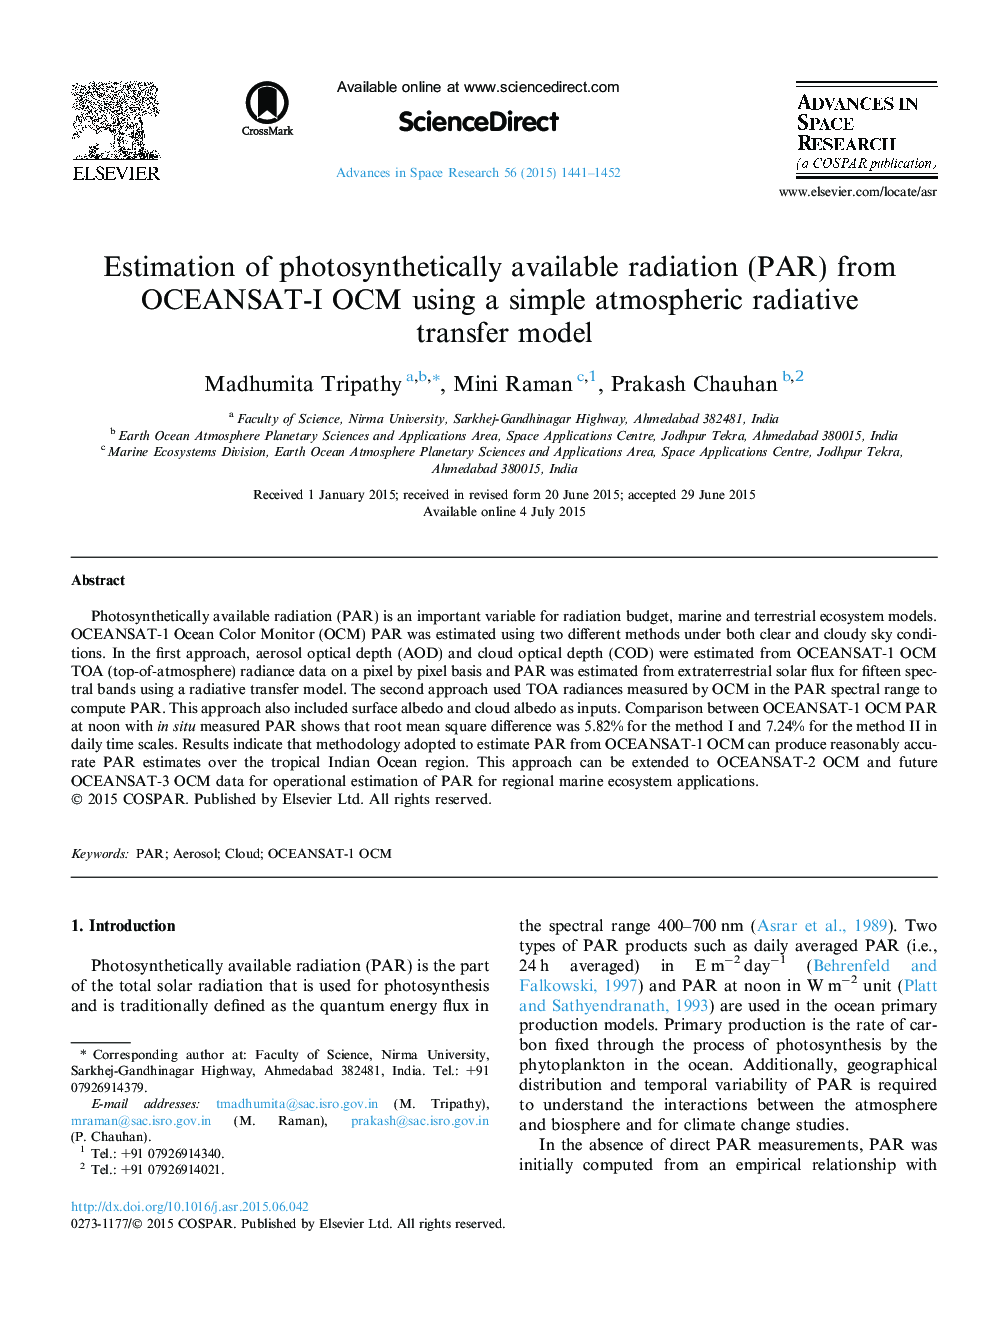 Estimation of photosynthetically available radiation (PAR) from OCEANSAT-I OCM using a simple atmospheric radiative transfer model